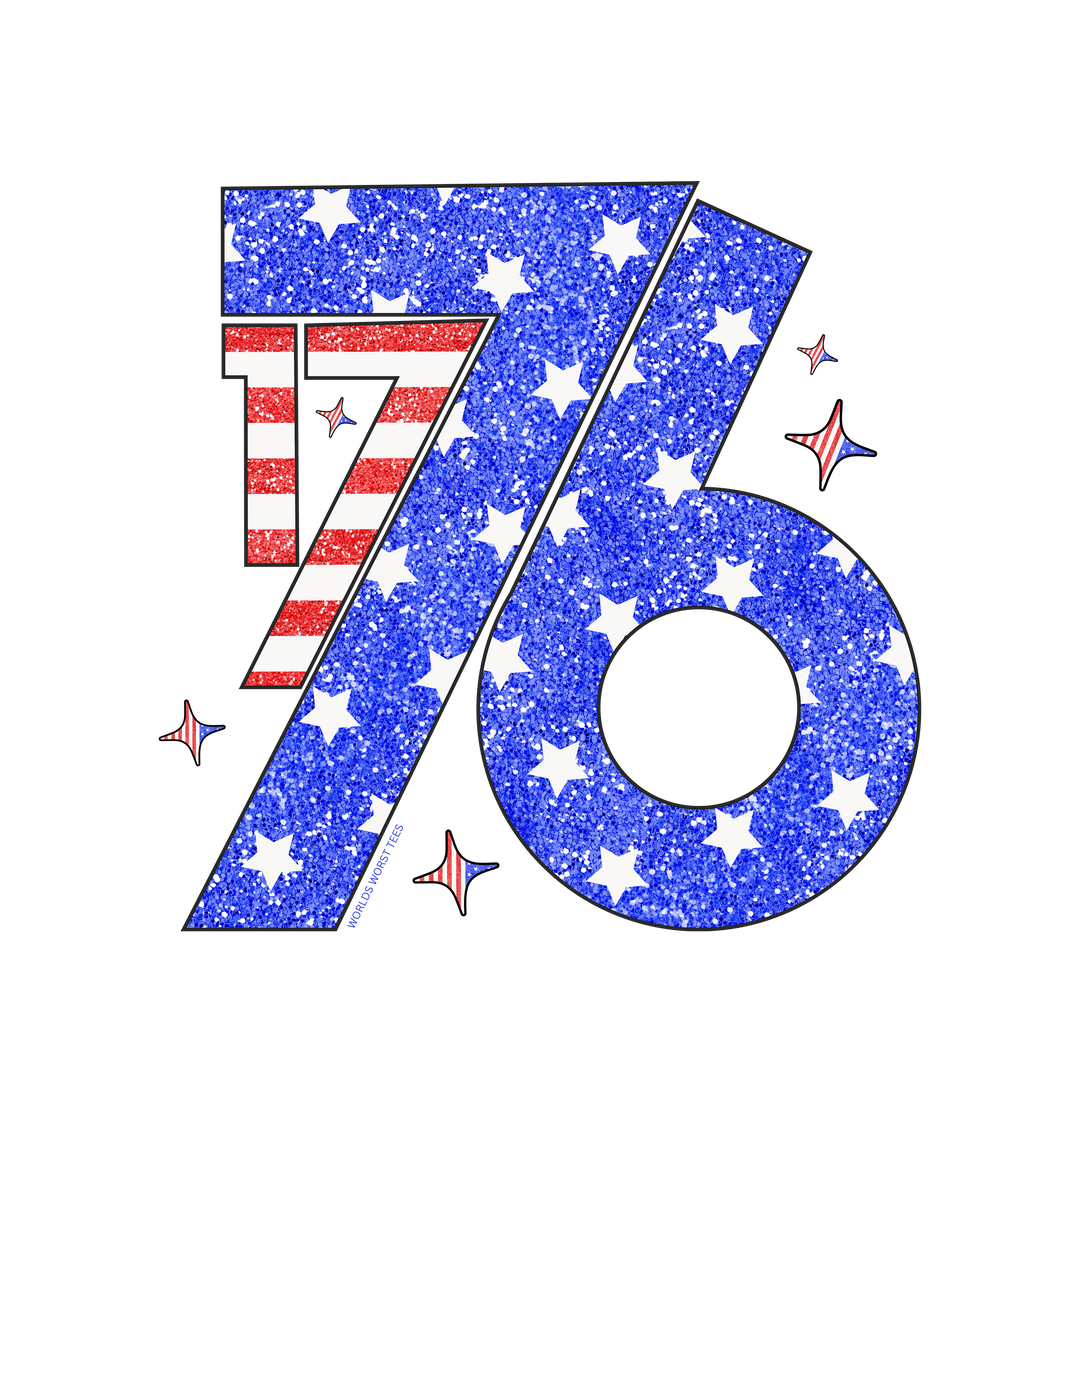 Unisex 1776 Tee with stars and stripes design on blue and white background. Soft cotton, ribbed knit collars, tear away label, and retail fit for a comfortable, stylish look.